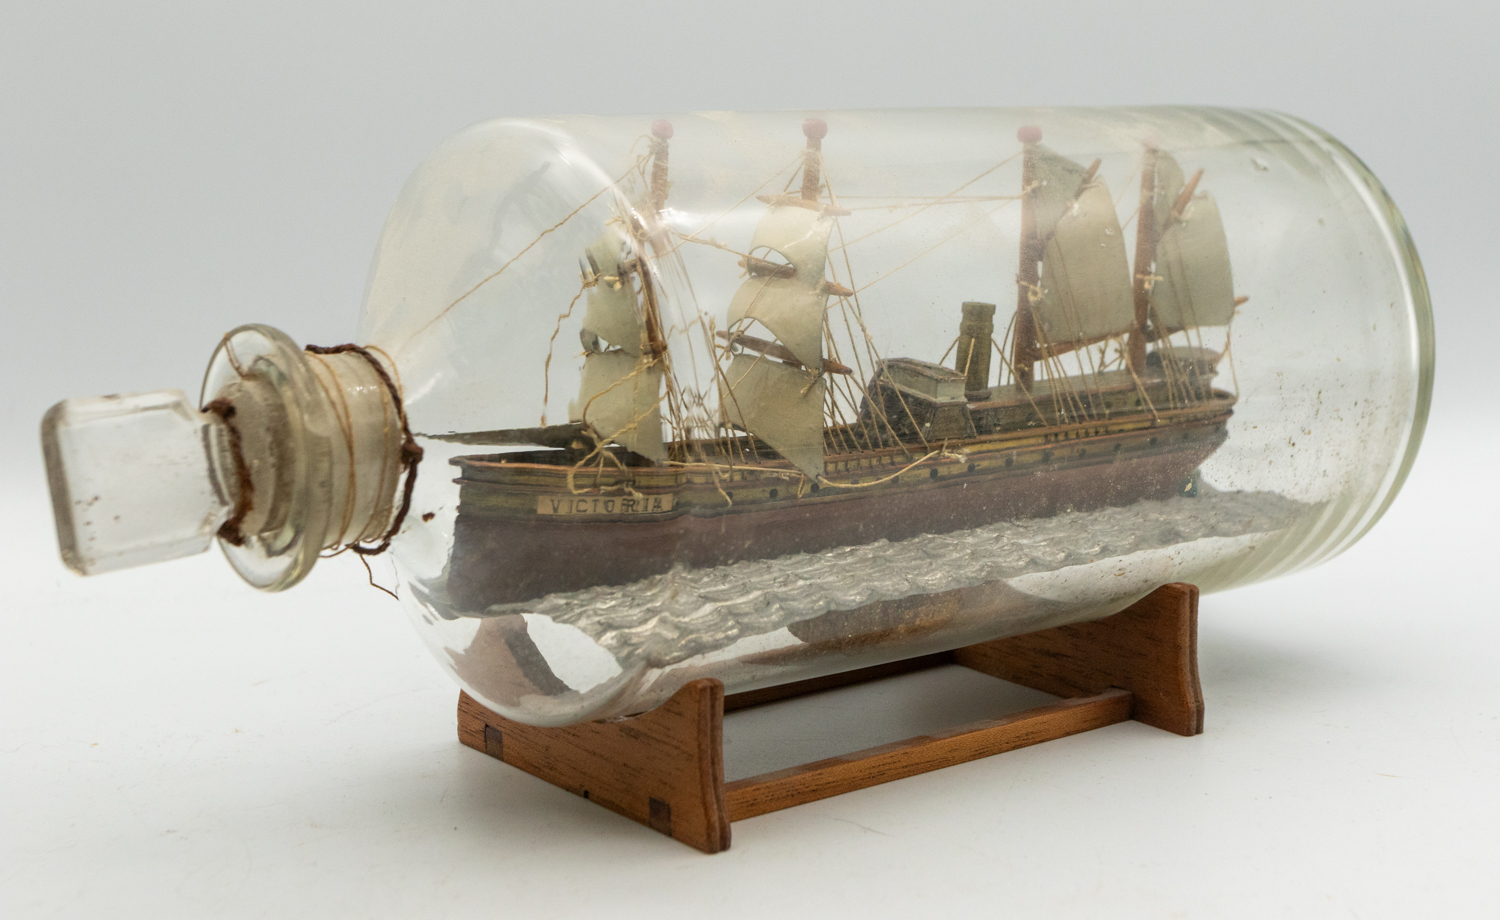 Two 19th century wooden models of Ship's in glass bottles; one encased in a light wooden frame of - Image 3 of 4